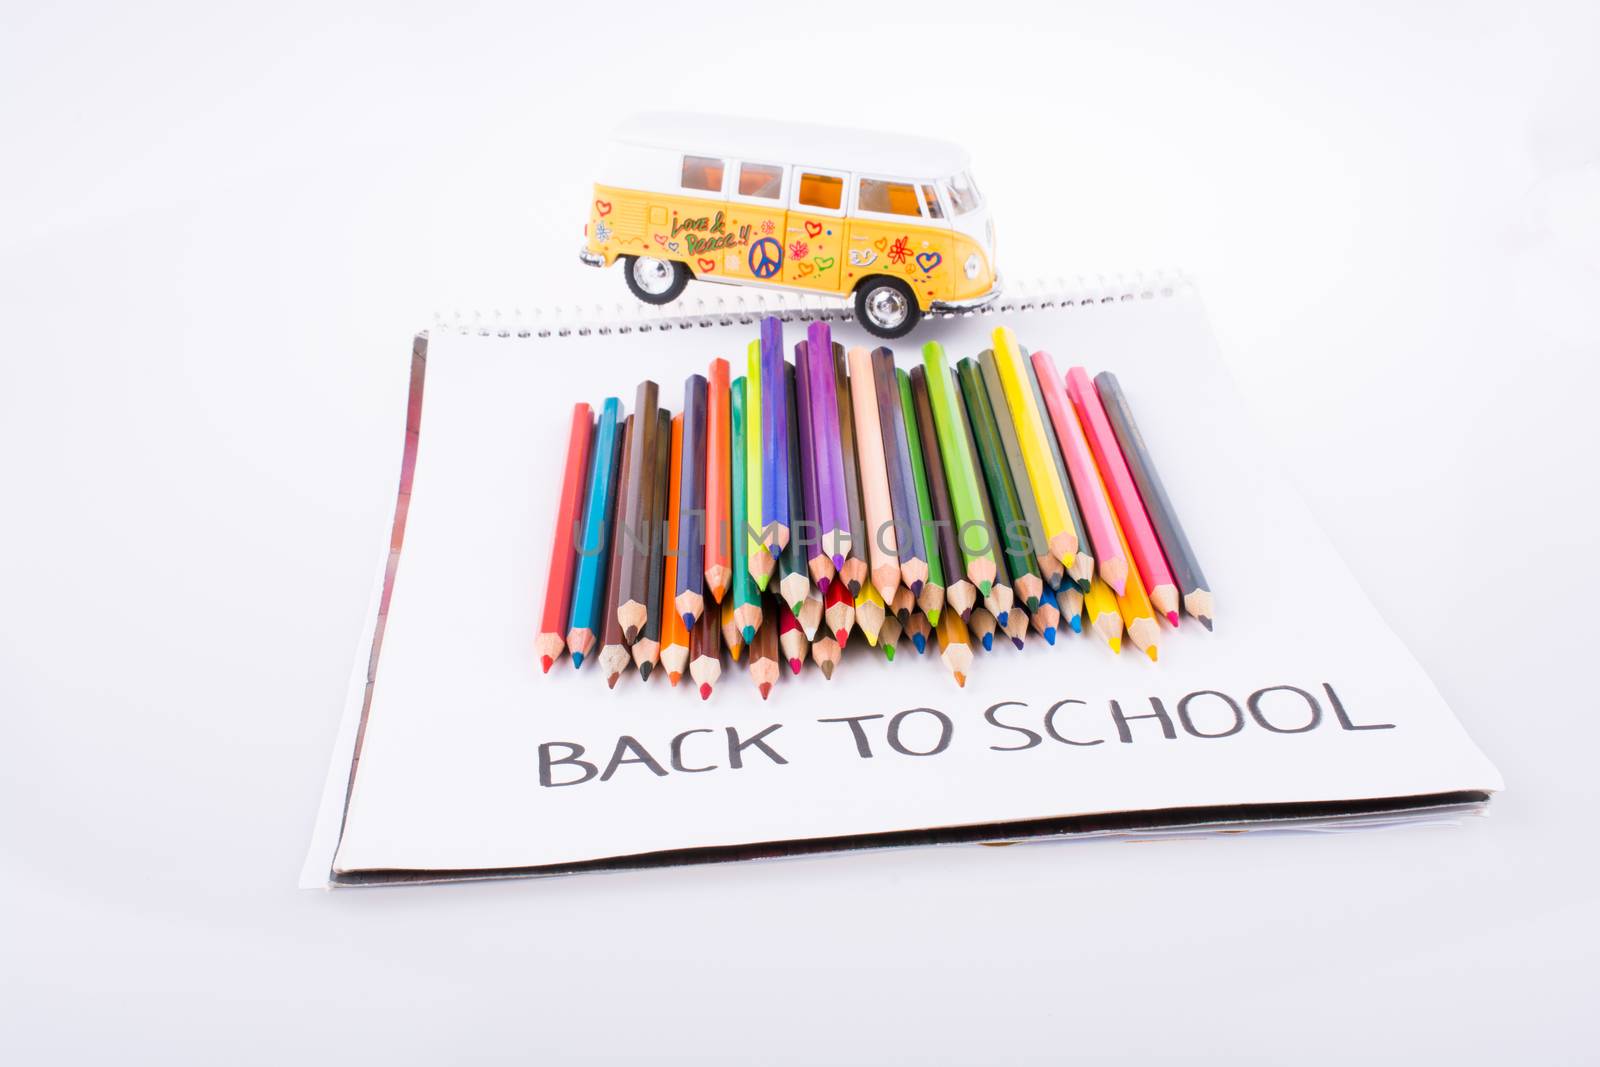 Color pencils, van and back to school title on a notebook